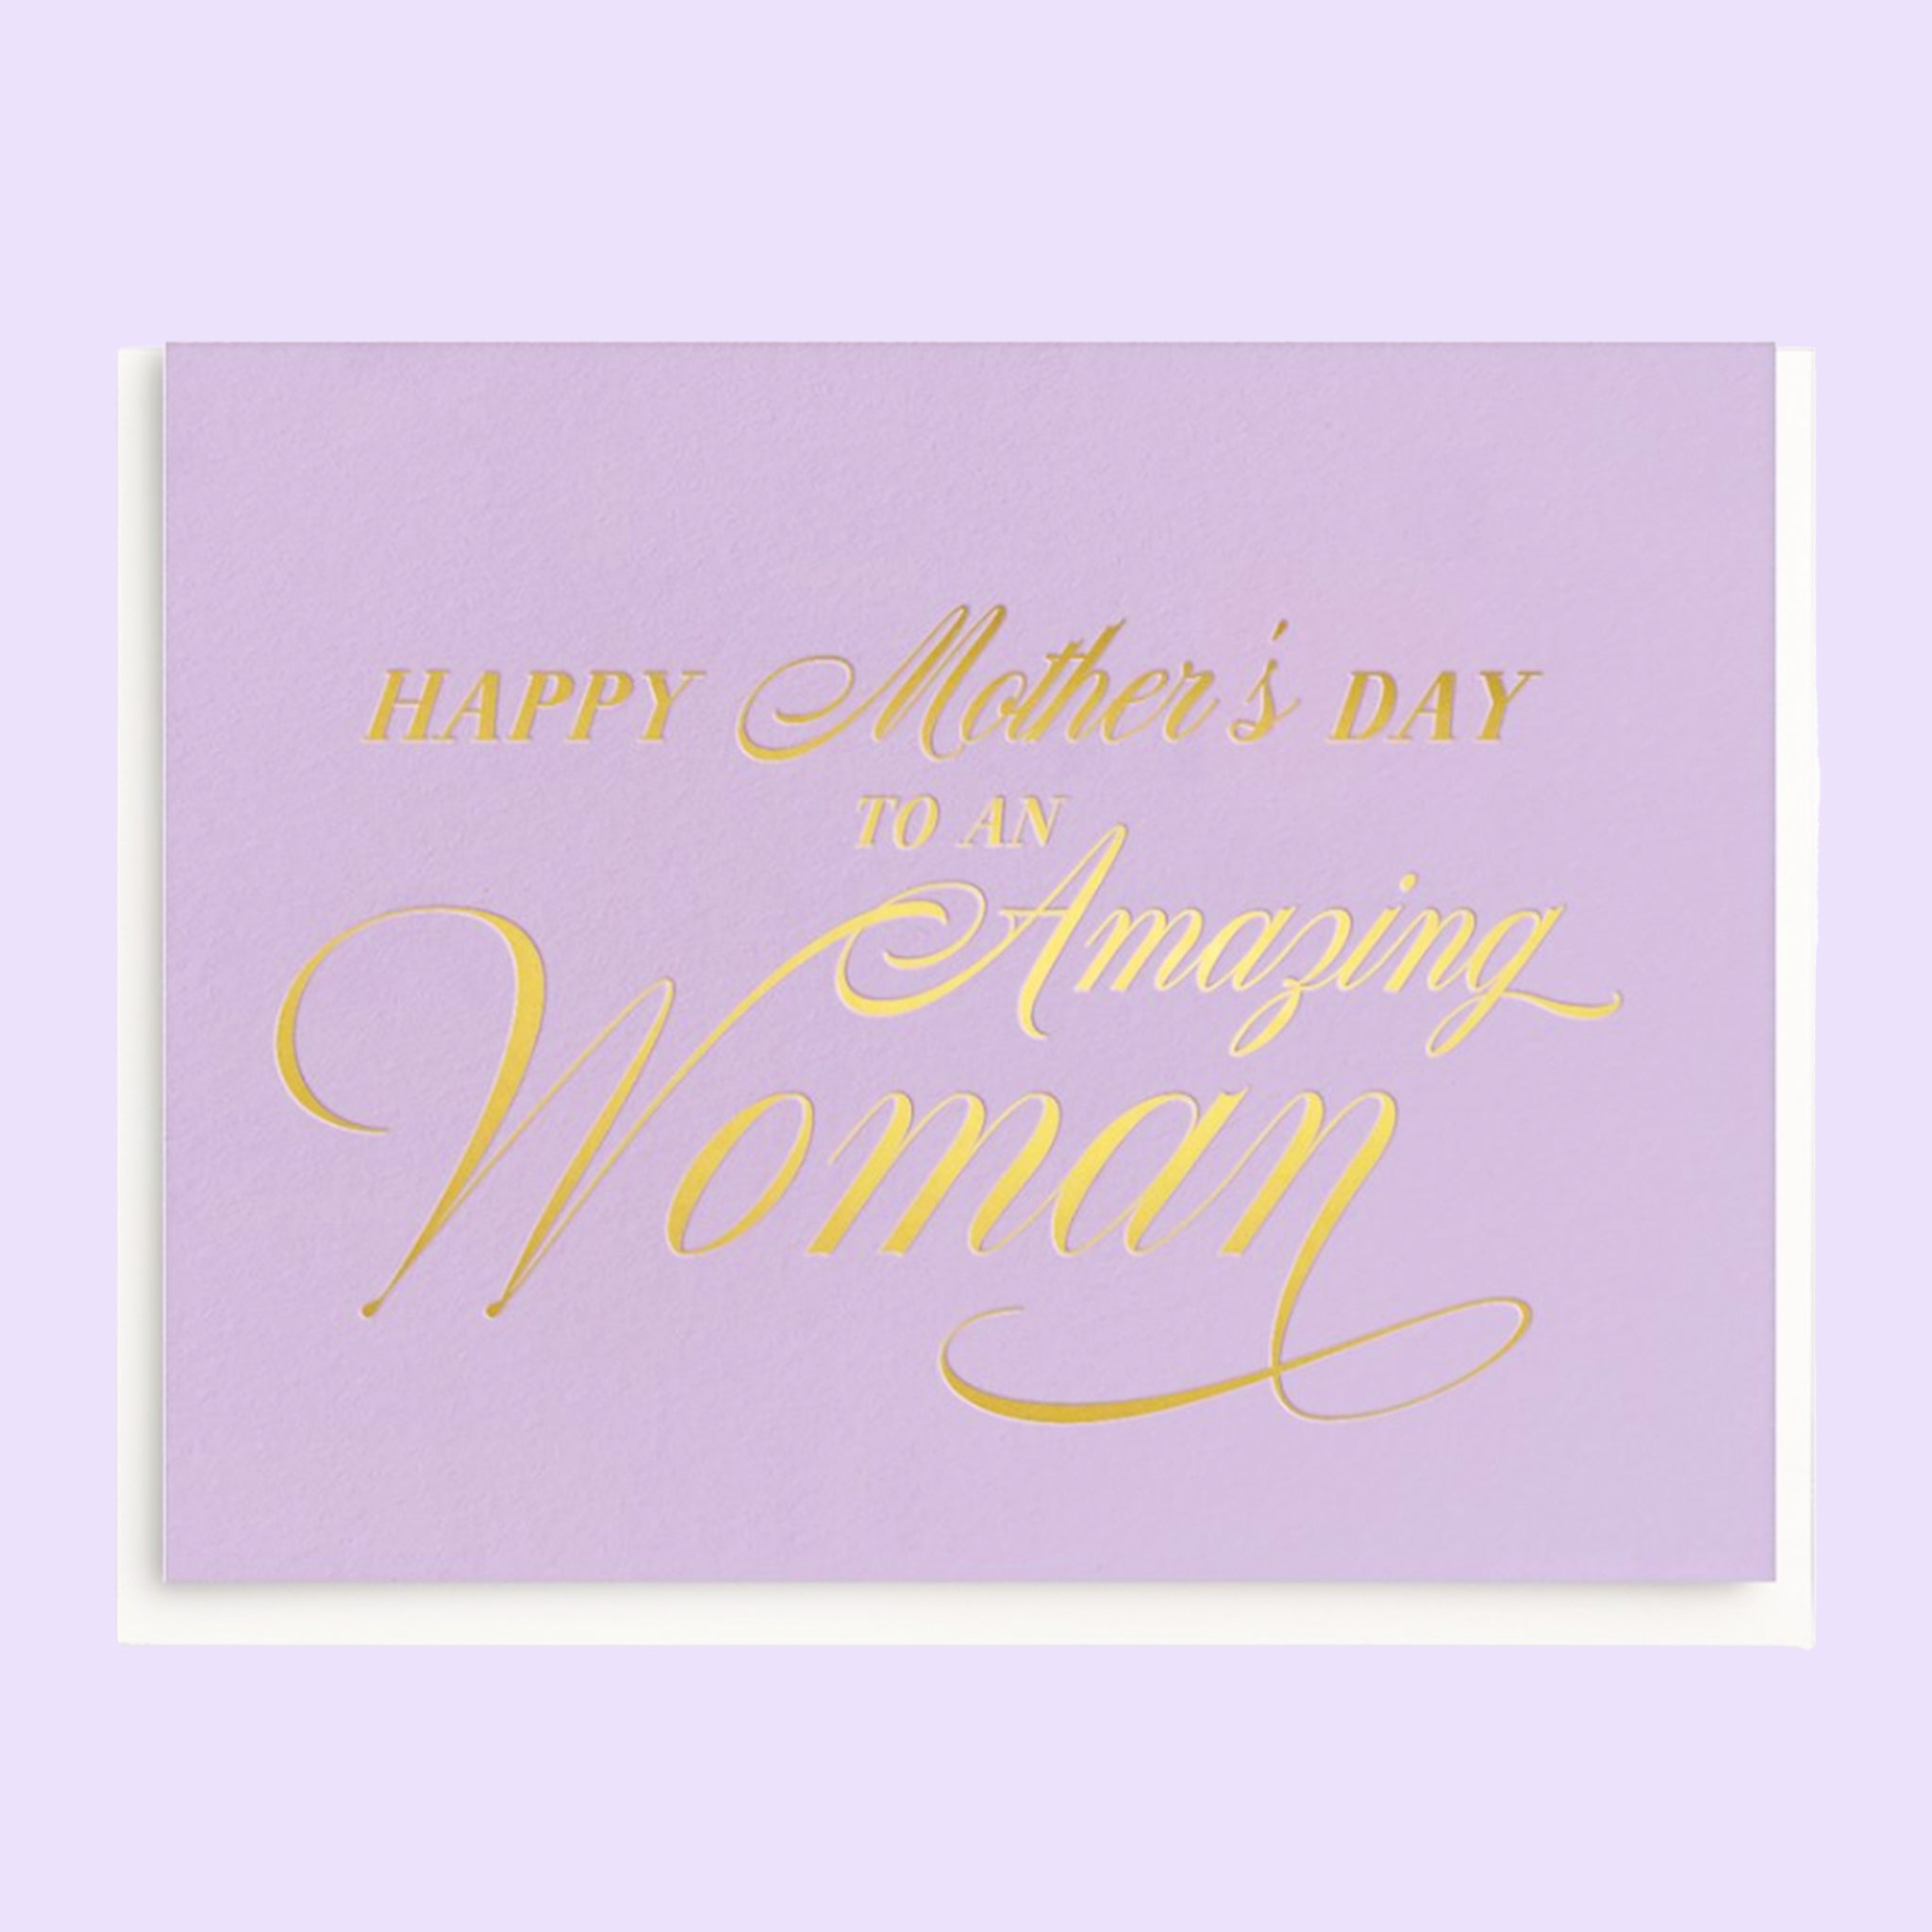 A light purple greeting card with white envelope with gold foil font "Happy Mother's Day to an Amazing Woman."